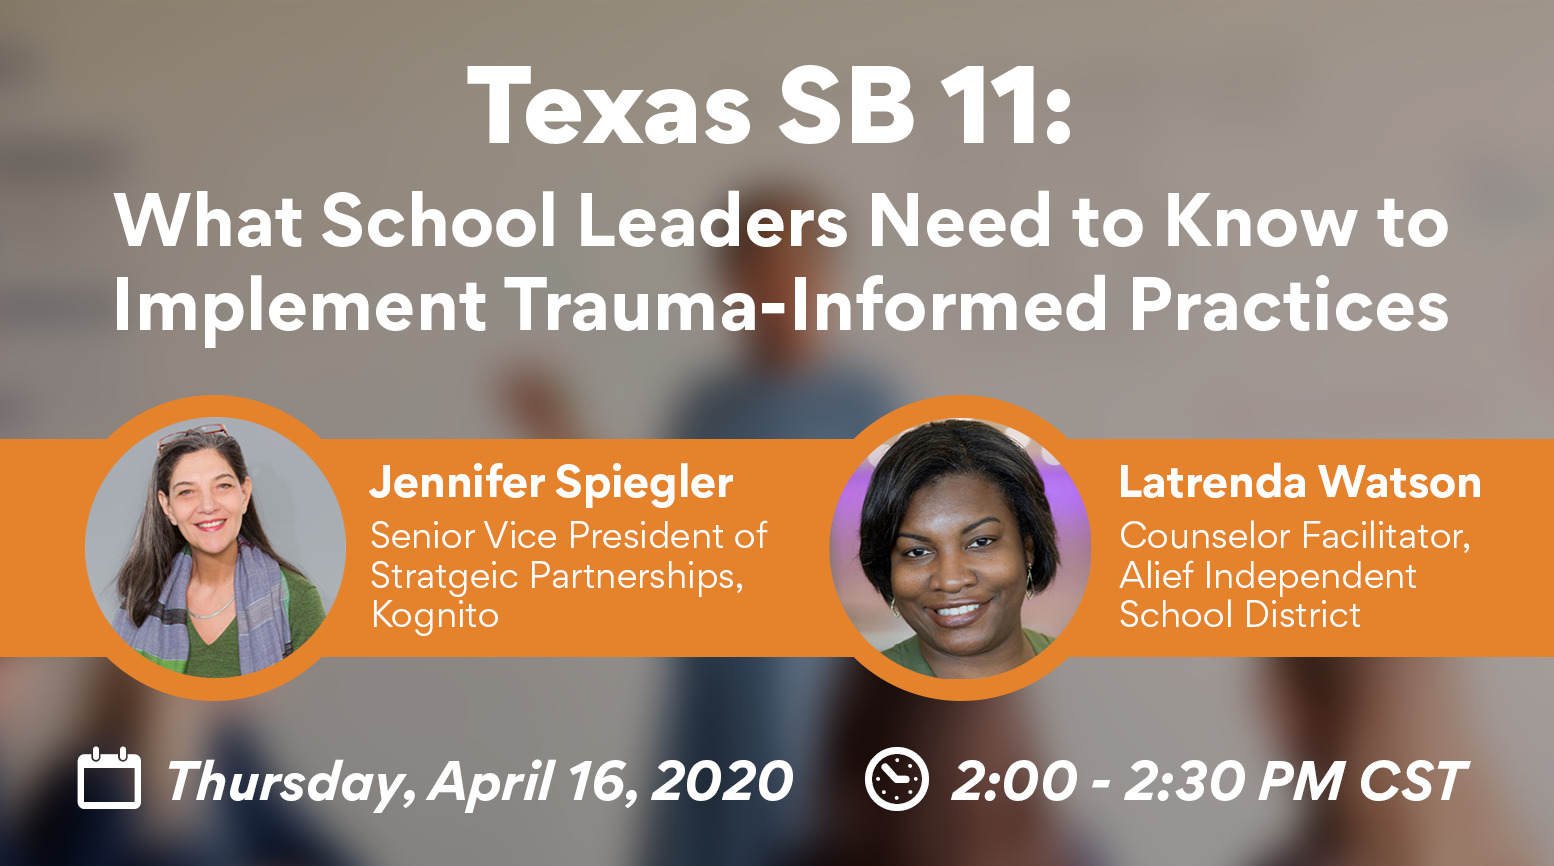 Texas SB 11: What School Leaders Need to Know to Implement Trauma-Informed Practices